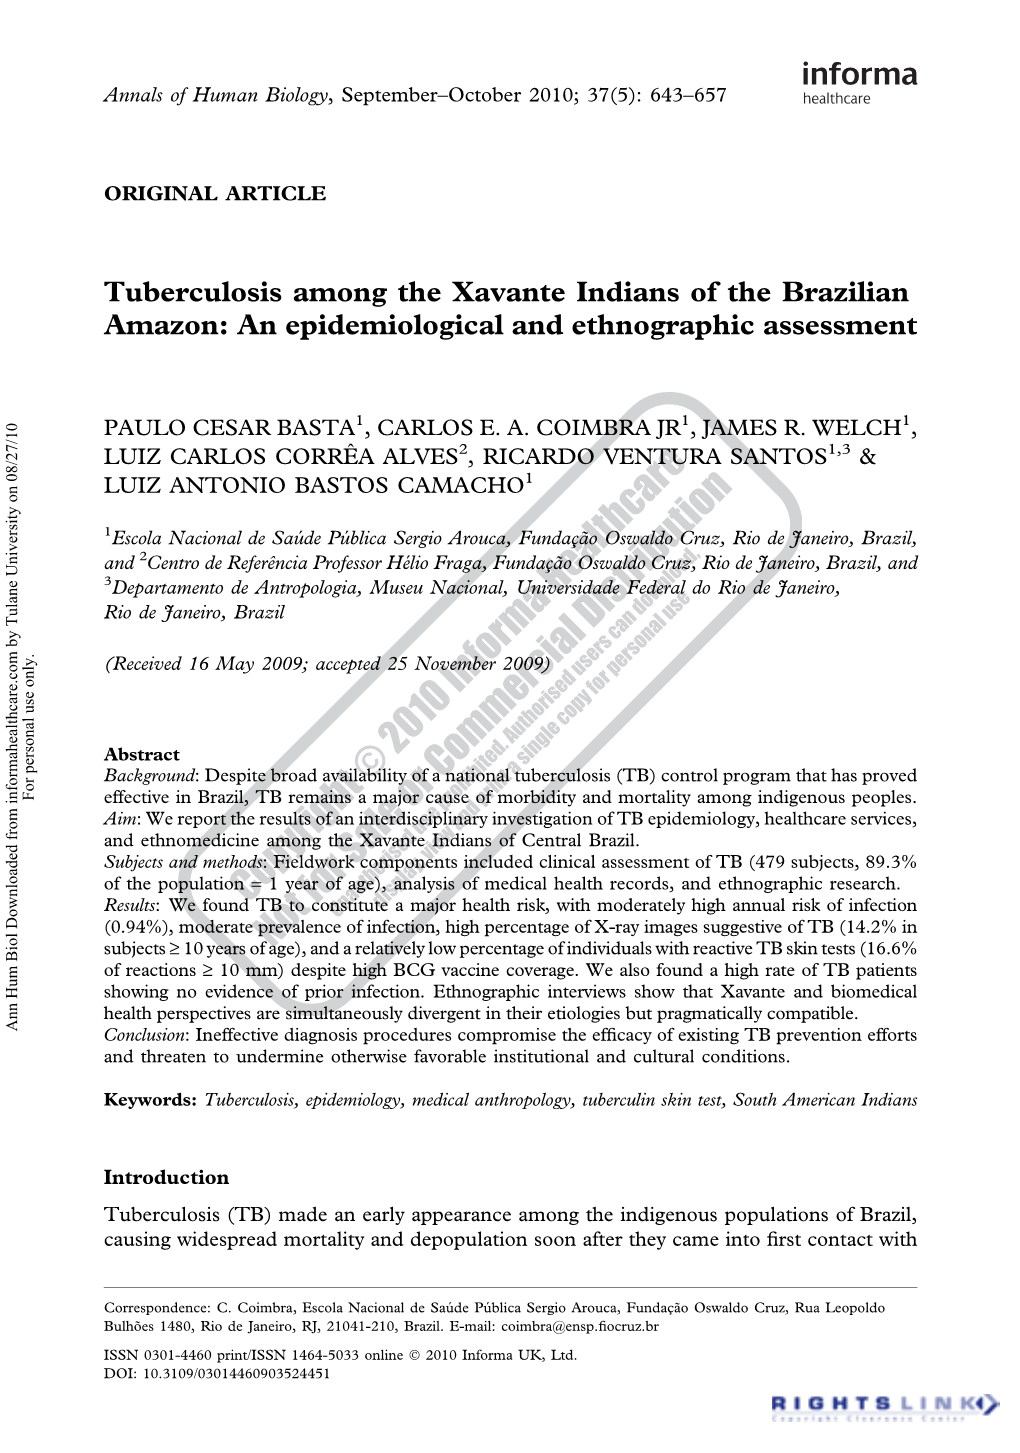 Tuberculosis Among the Xavante Indians of the Brazilian Amazon: an Epidemiological and Ethnographic Assessment